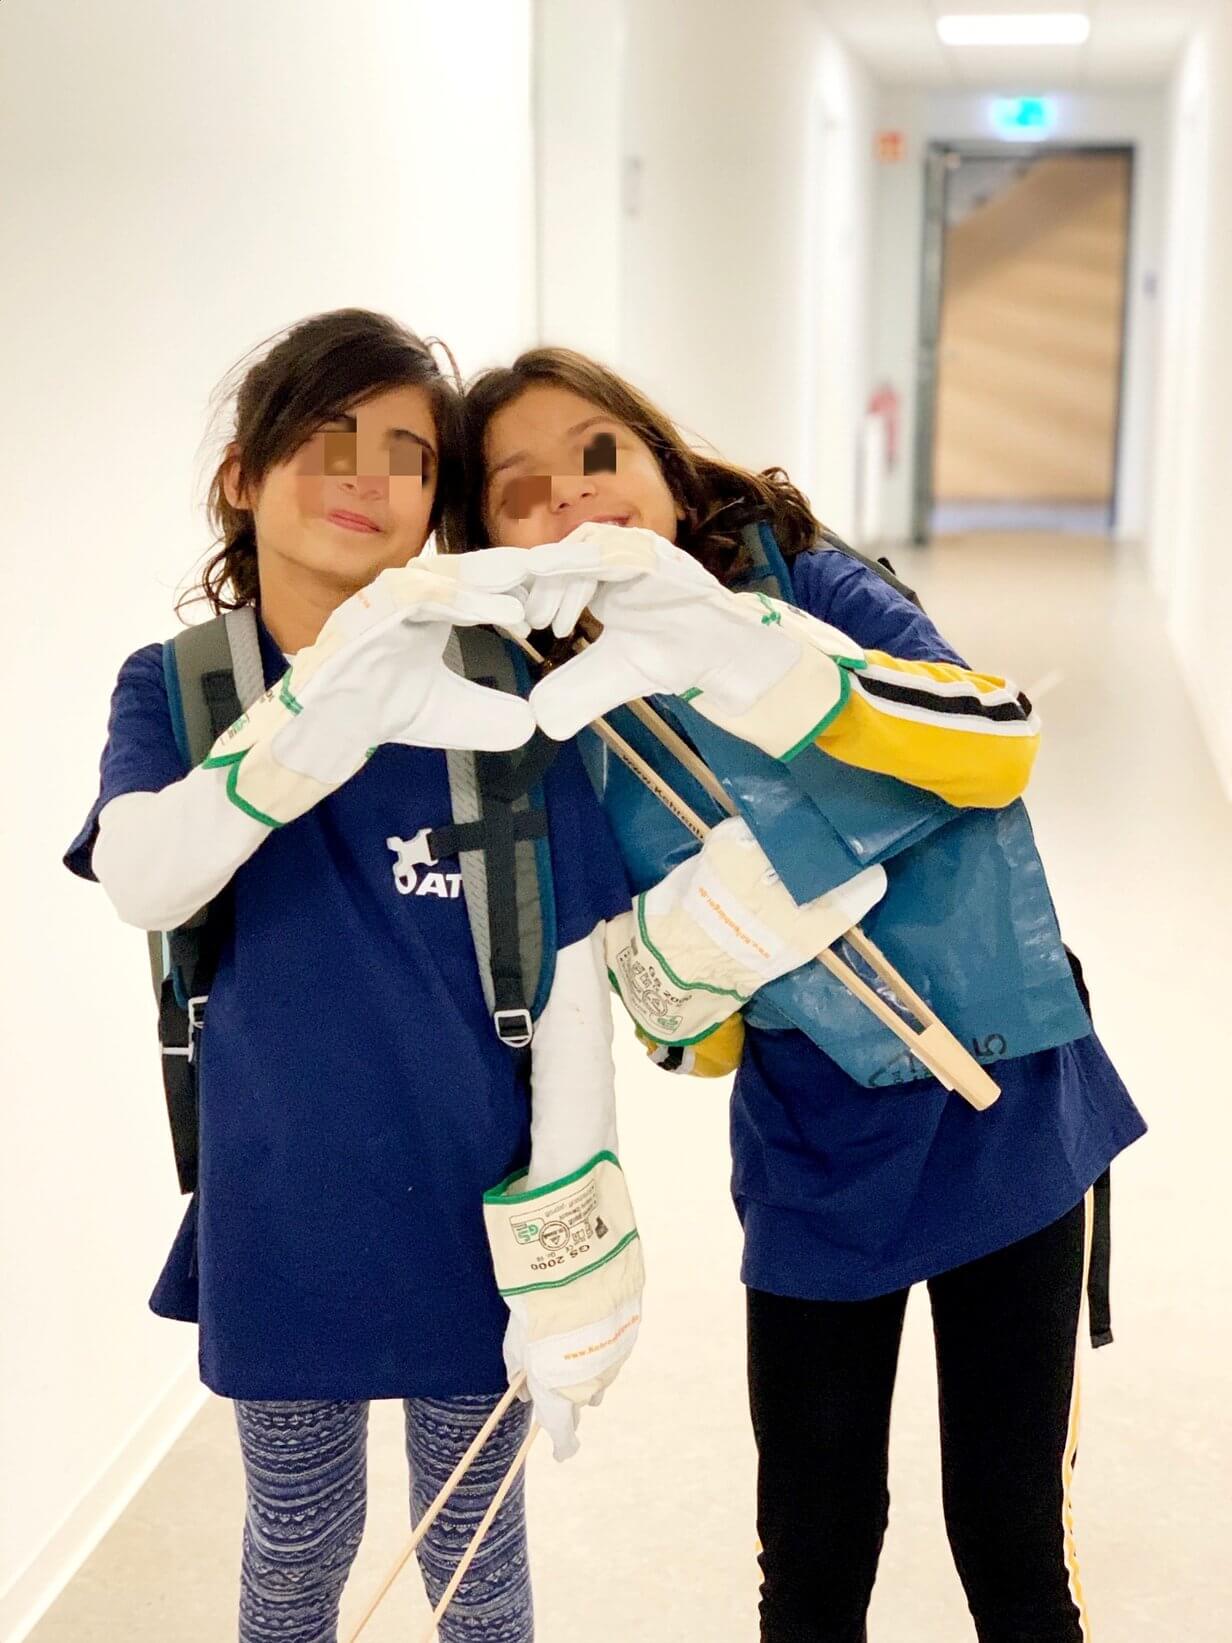 Children in cleaning gear show heart symbol